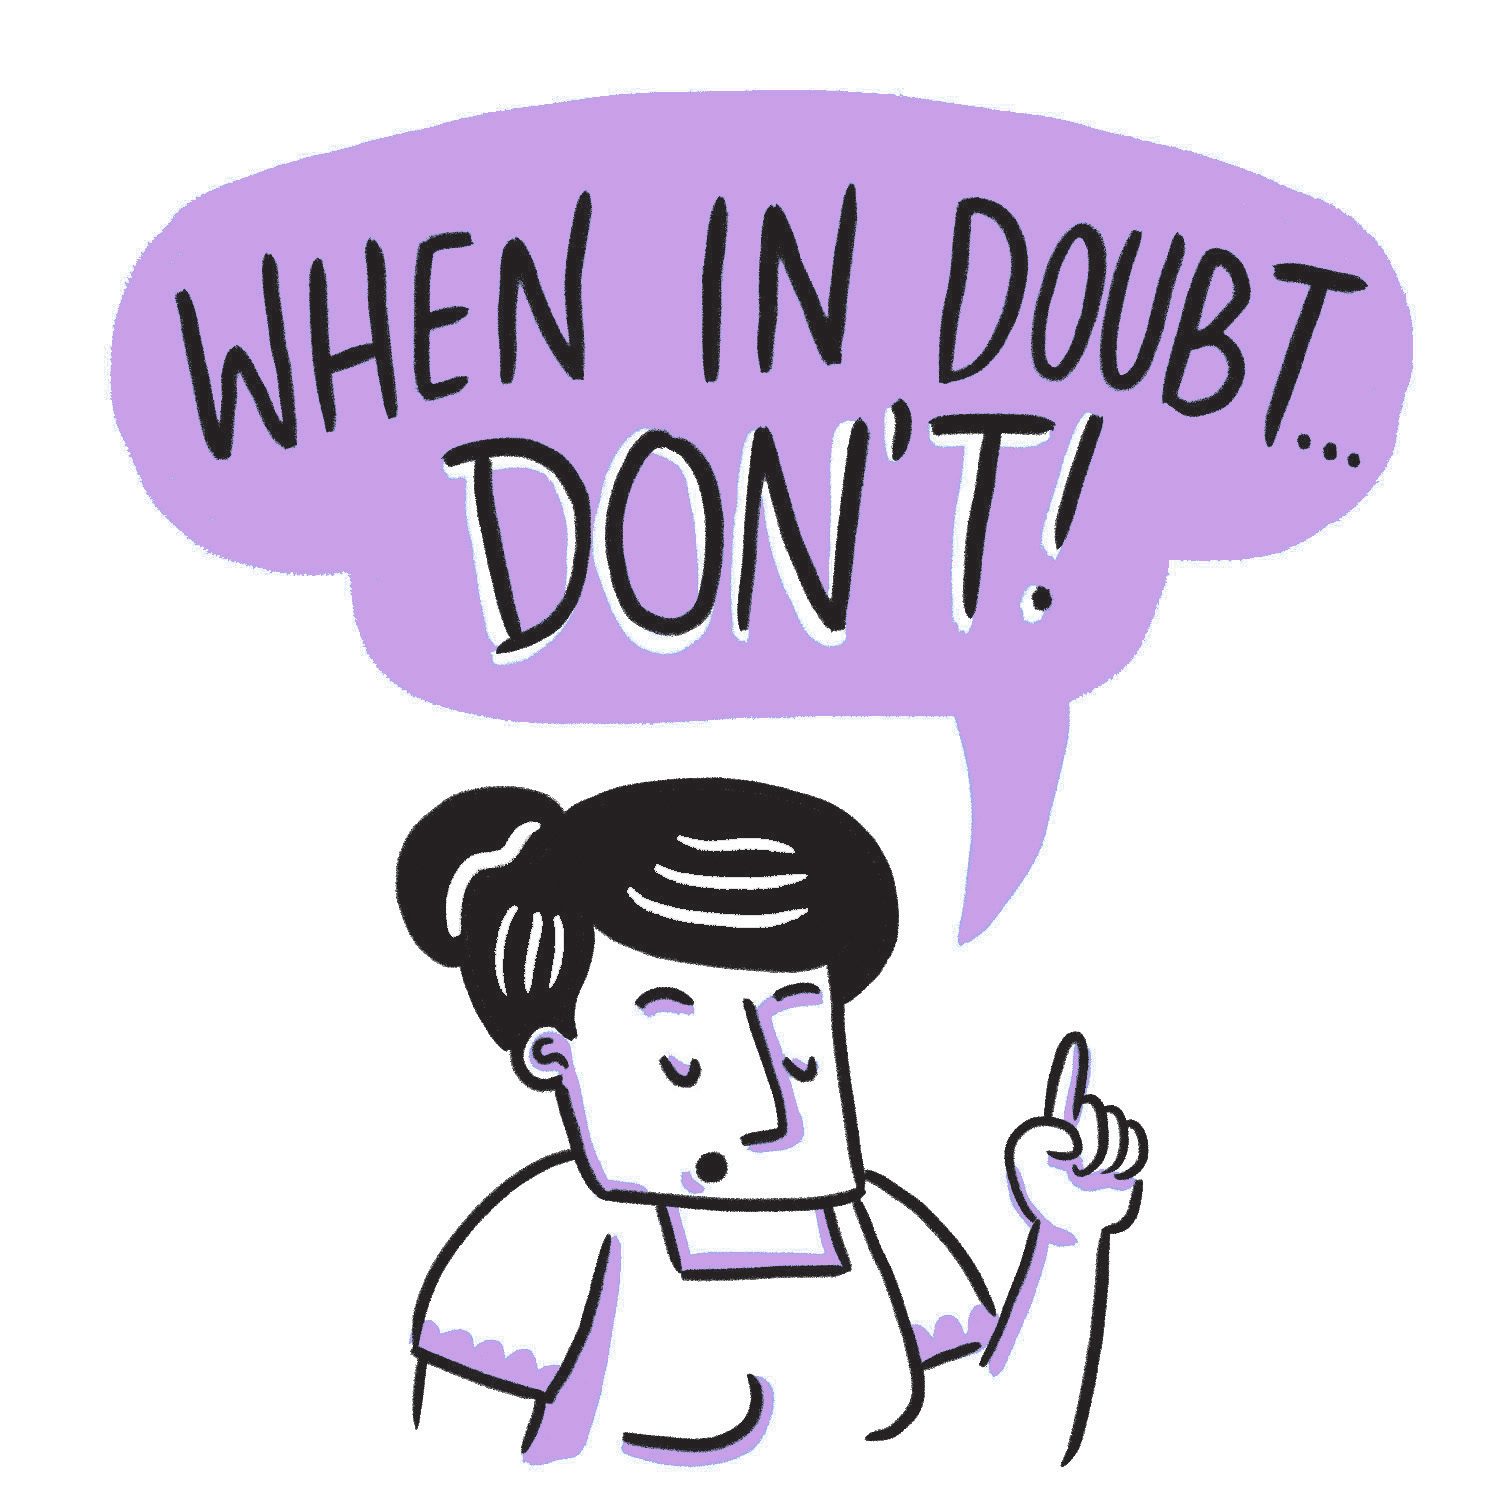 WHEN IT DOUBT, DON'T! Just don't. Illustrations by Pushpin Visual Solutions 